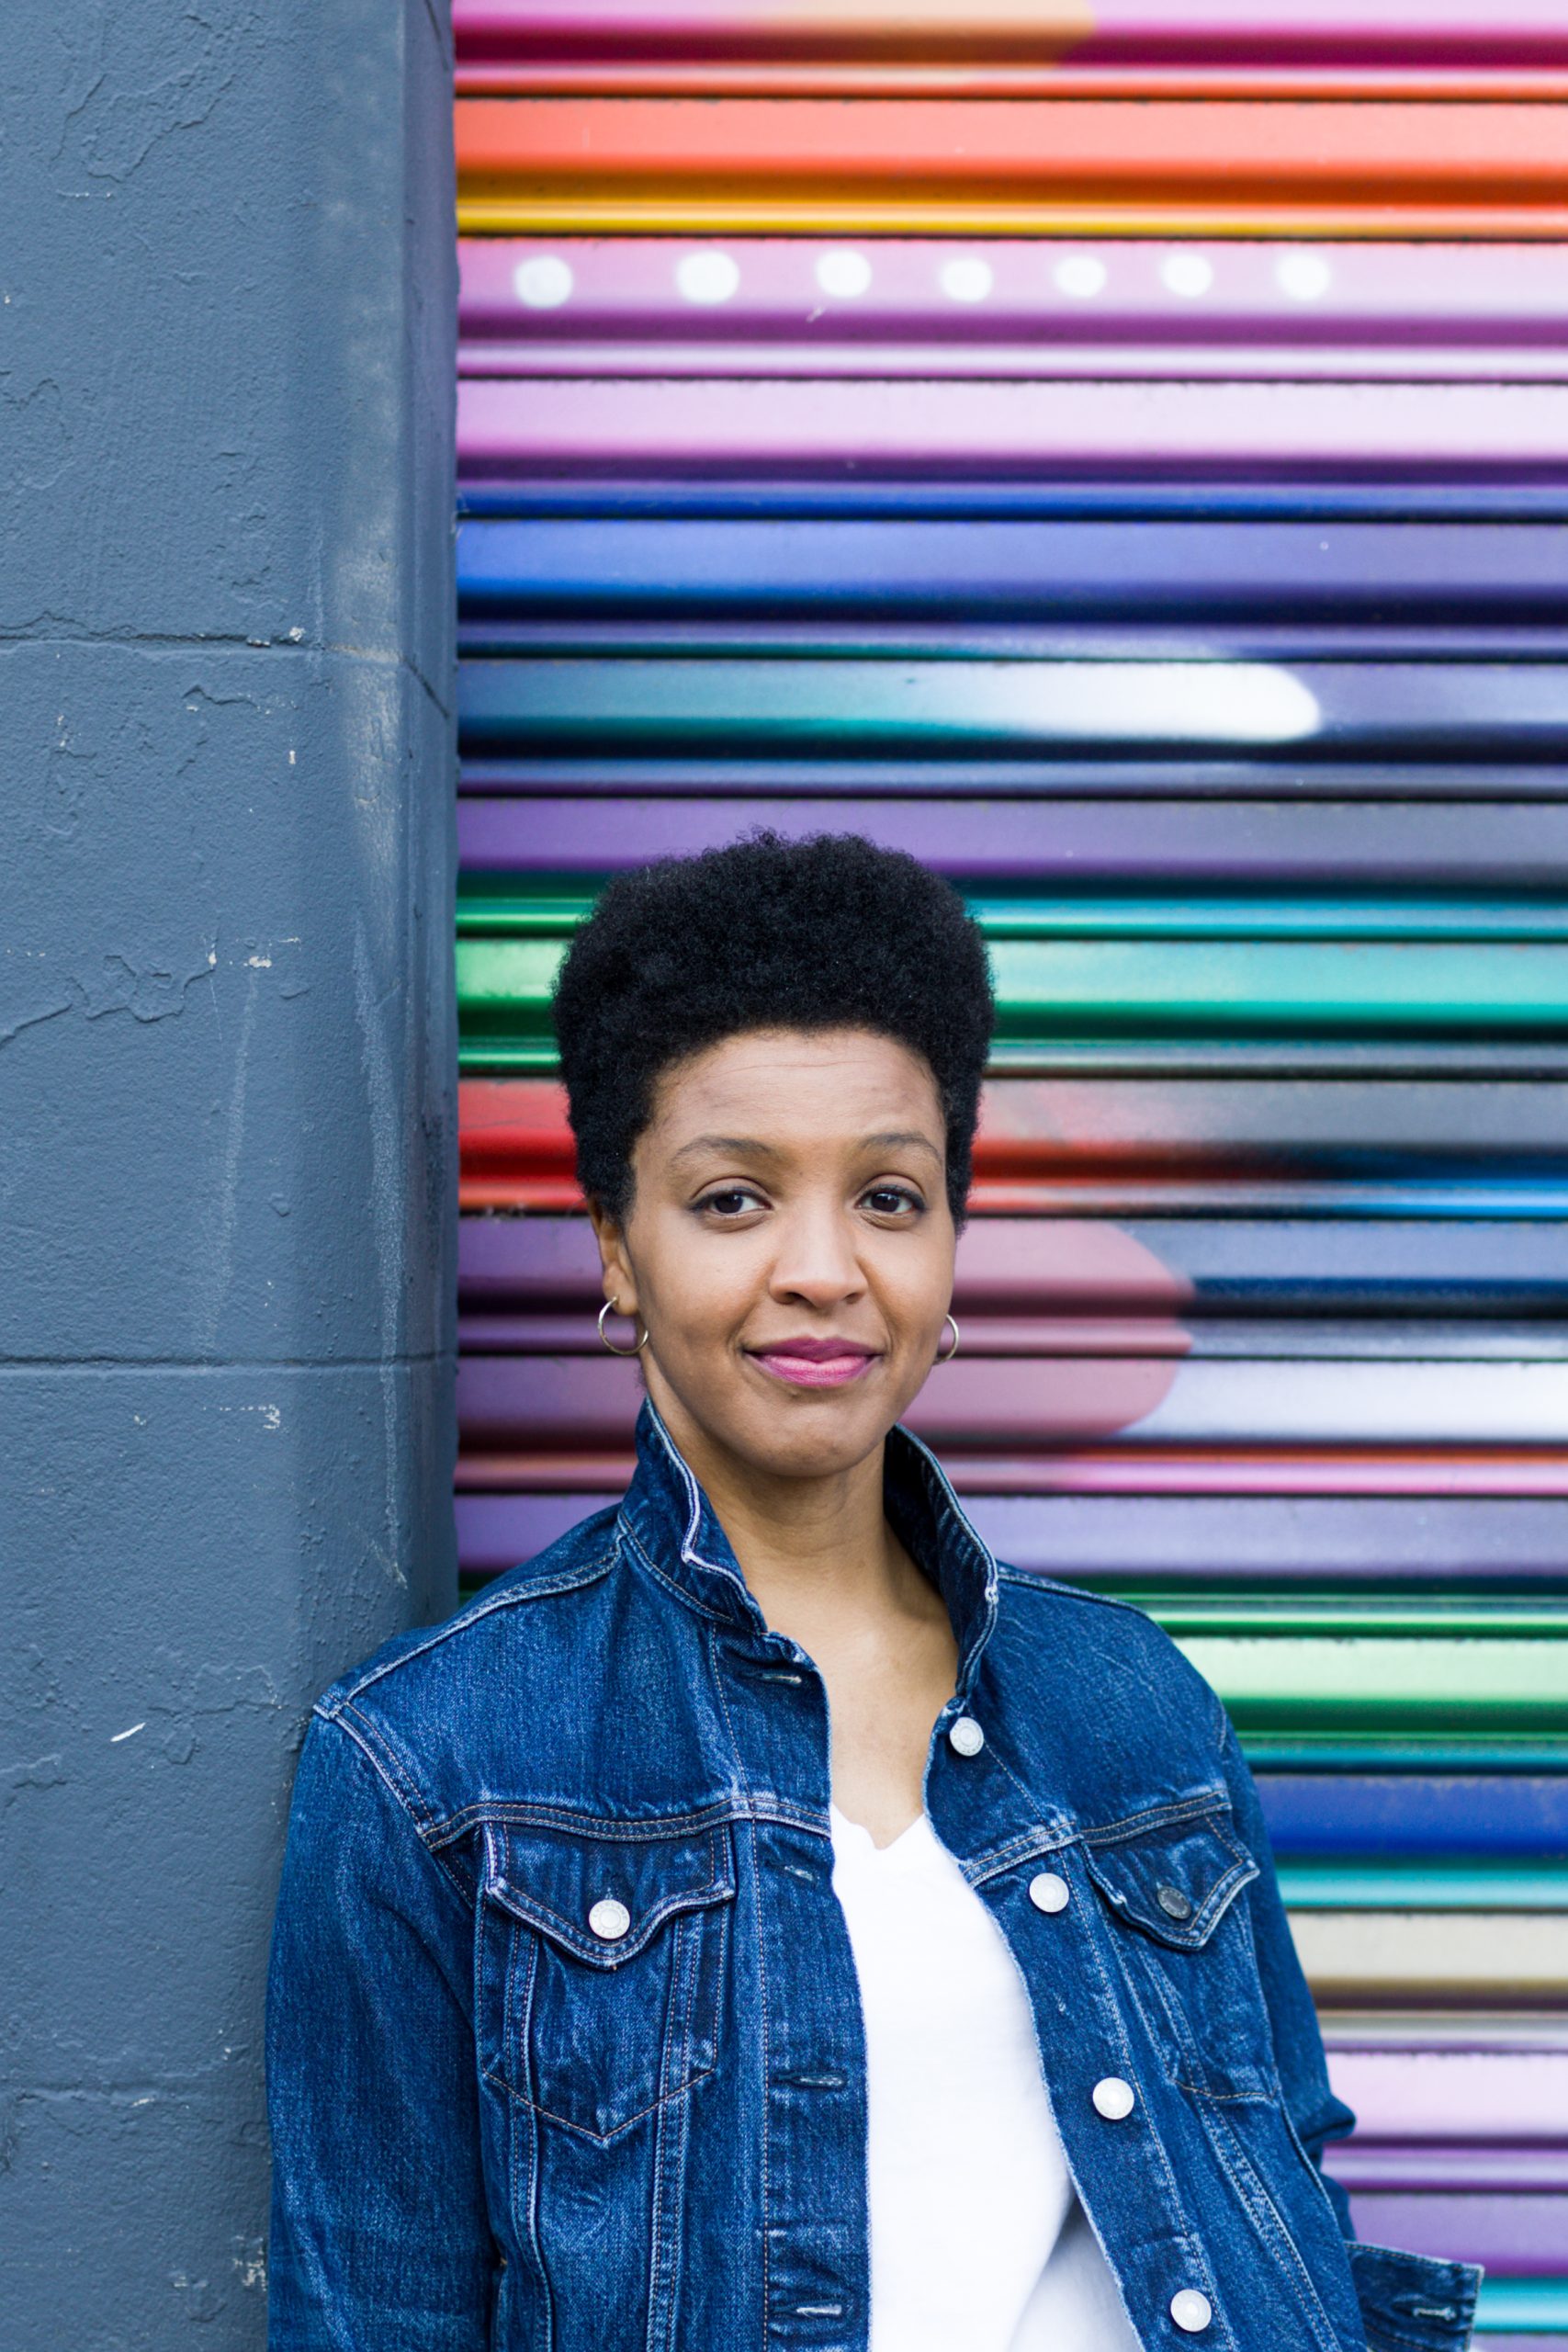 A woman with short black hair in a jean jacket and light shirt in front of a colorful background